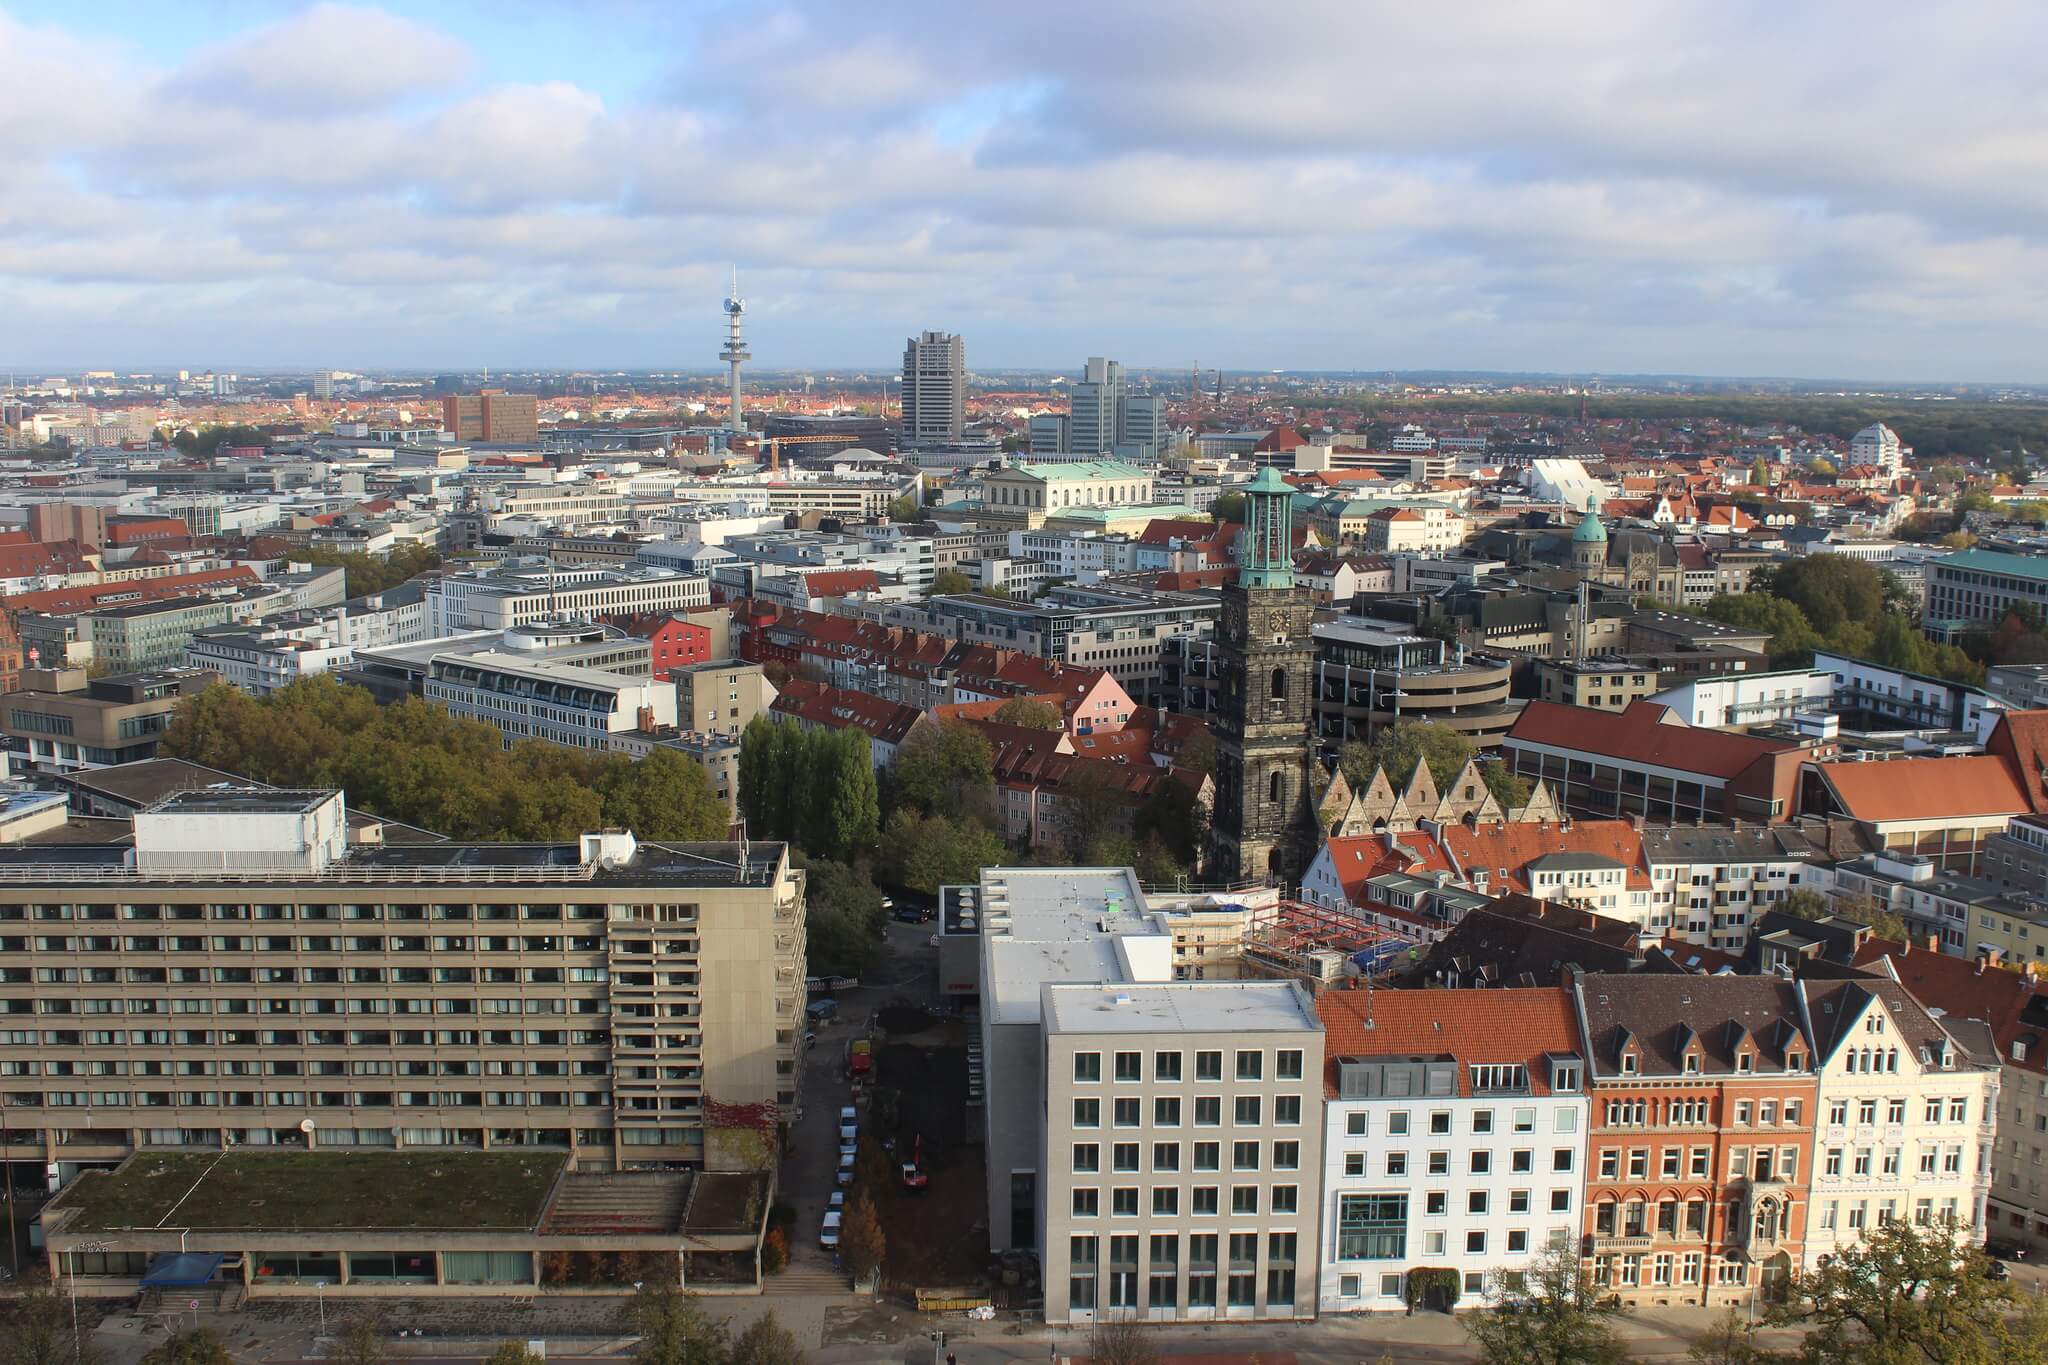 Hanover seen from the tower of the New Cityhall, Germany